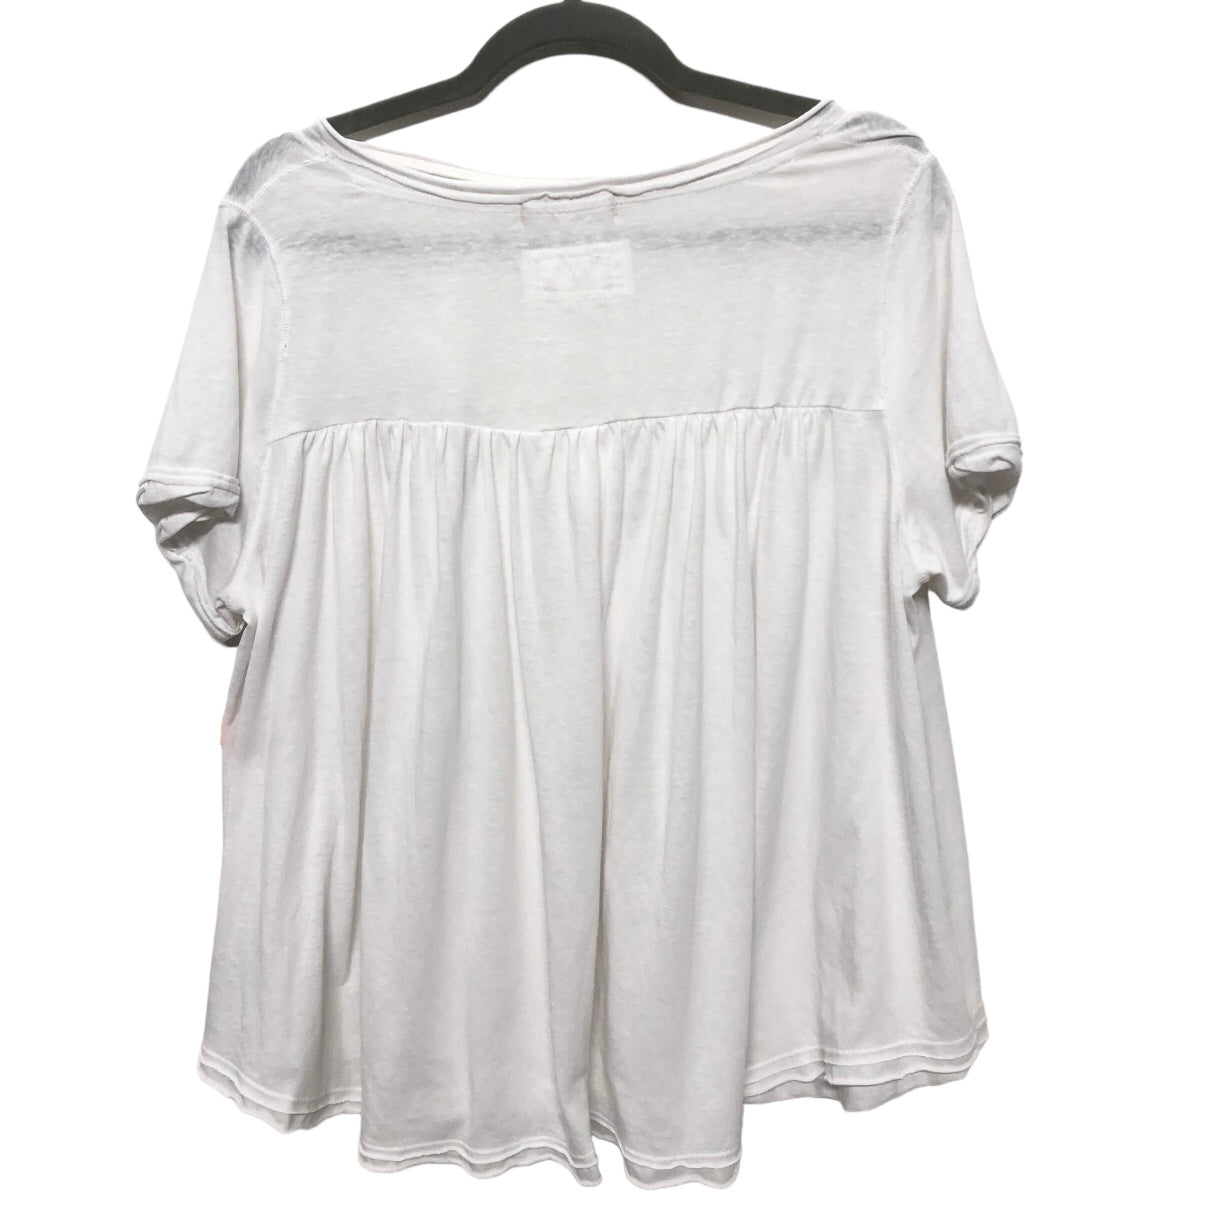 White Top Short Sleeve We The Free, Size S